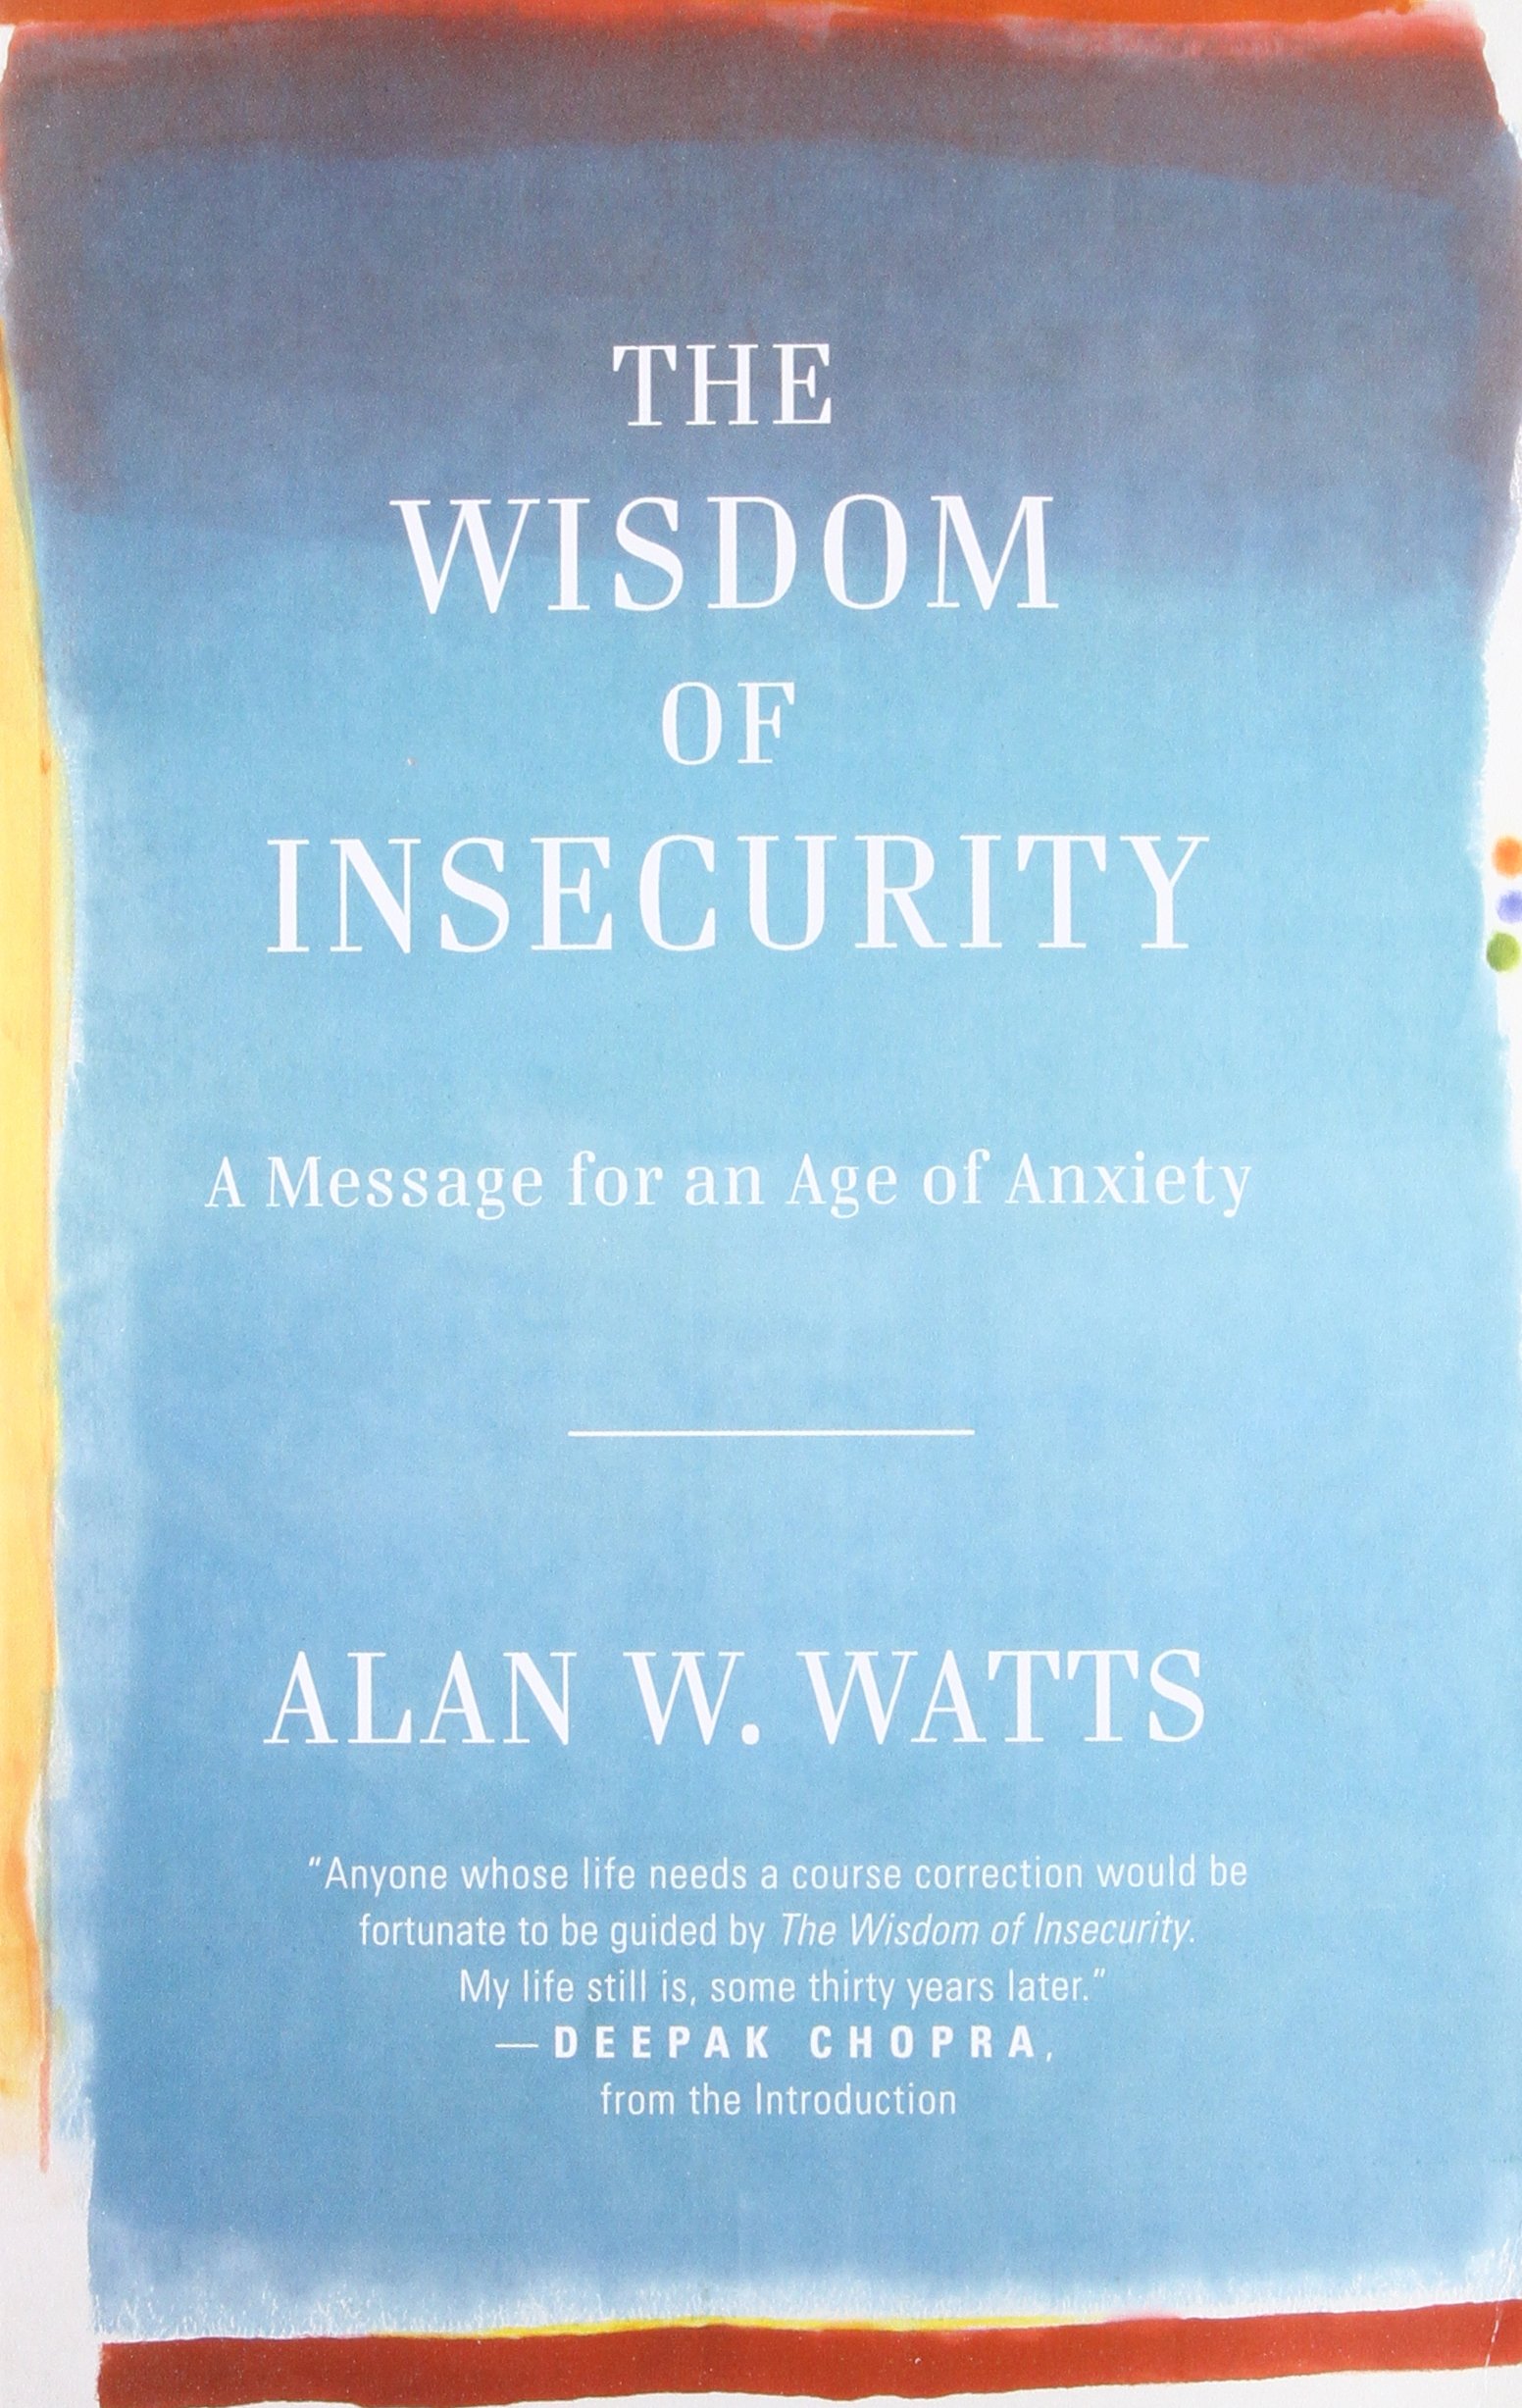 The Wisdom of Insecurity Summary